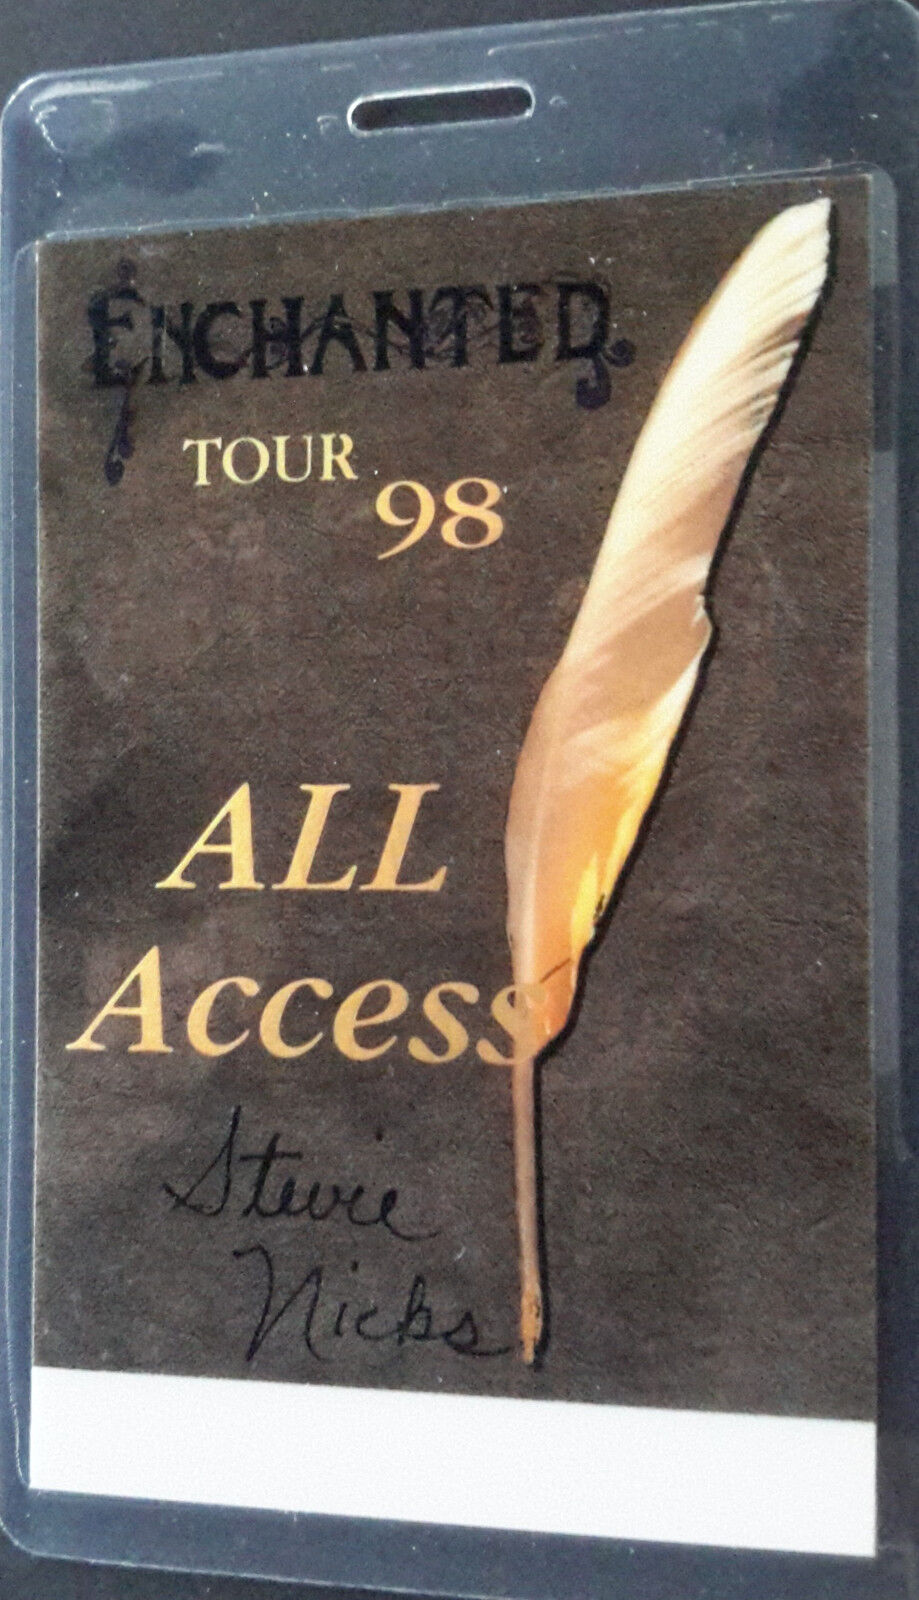 STEVIE NICKS - LAMINATED ALL ACCESS BACKSTAGE PASS - 1998 ENCHANTED TOUR - FOIL